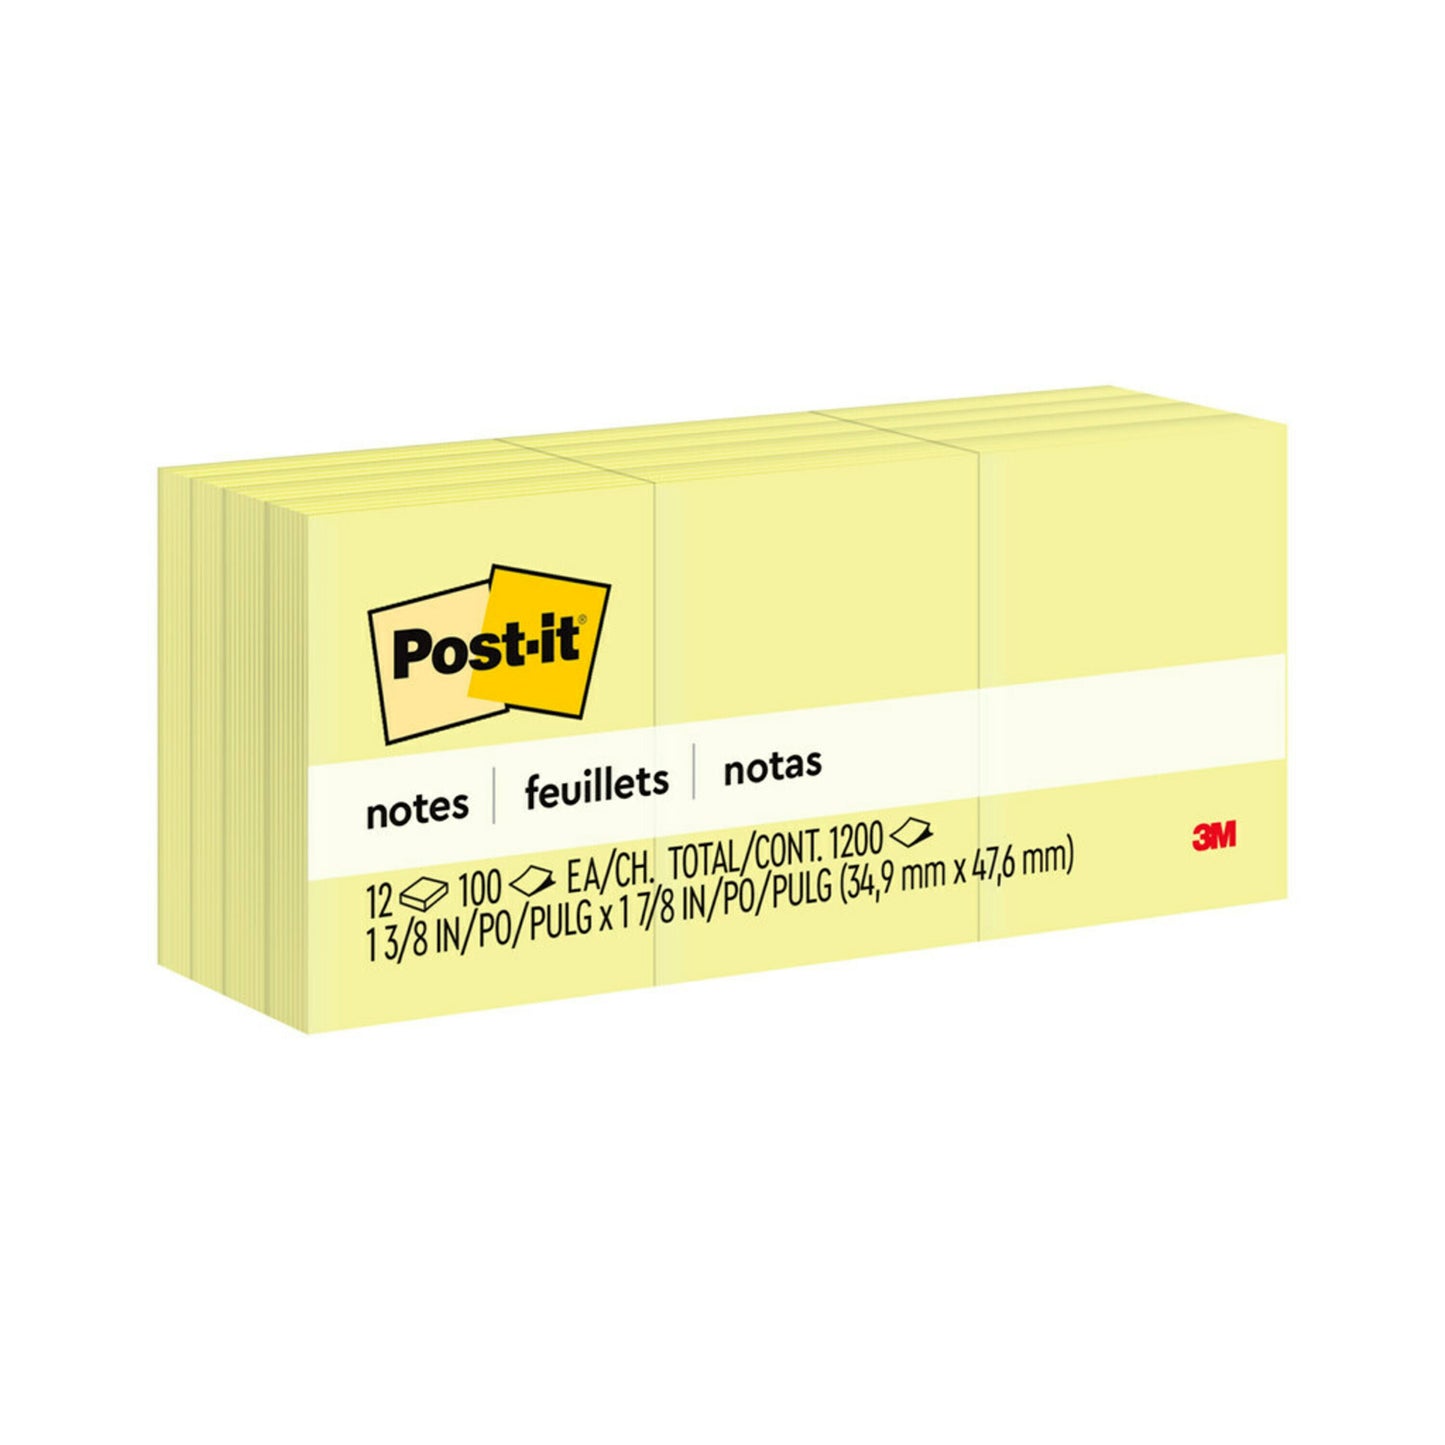 3M Post-it Mini Notes, 1 3/8 x 1 7/8 in, 12 Pads, Canary Yellow,100 Sheet/Pad, 12 Pads/Pack